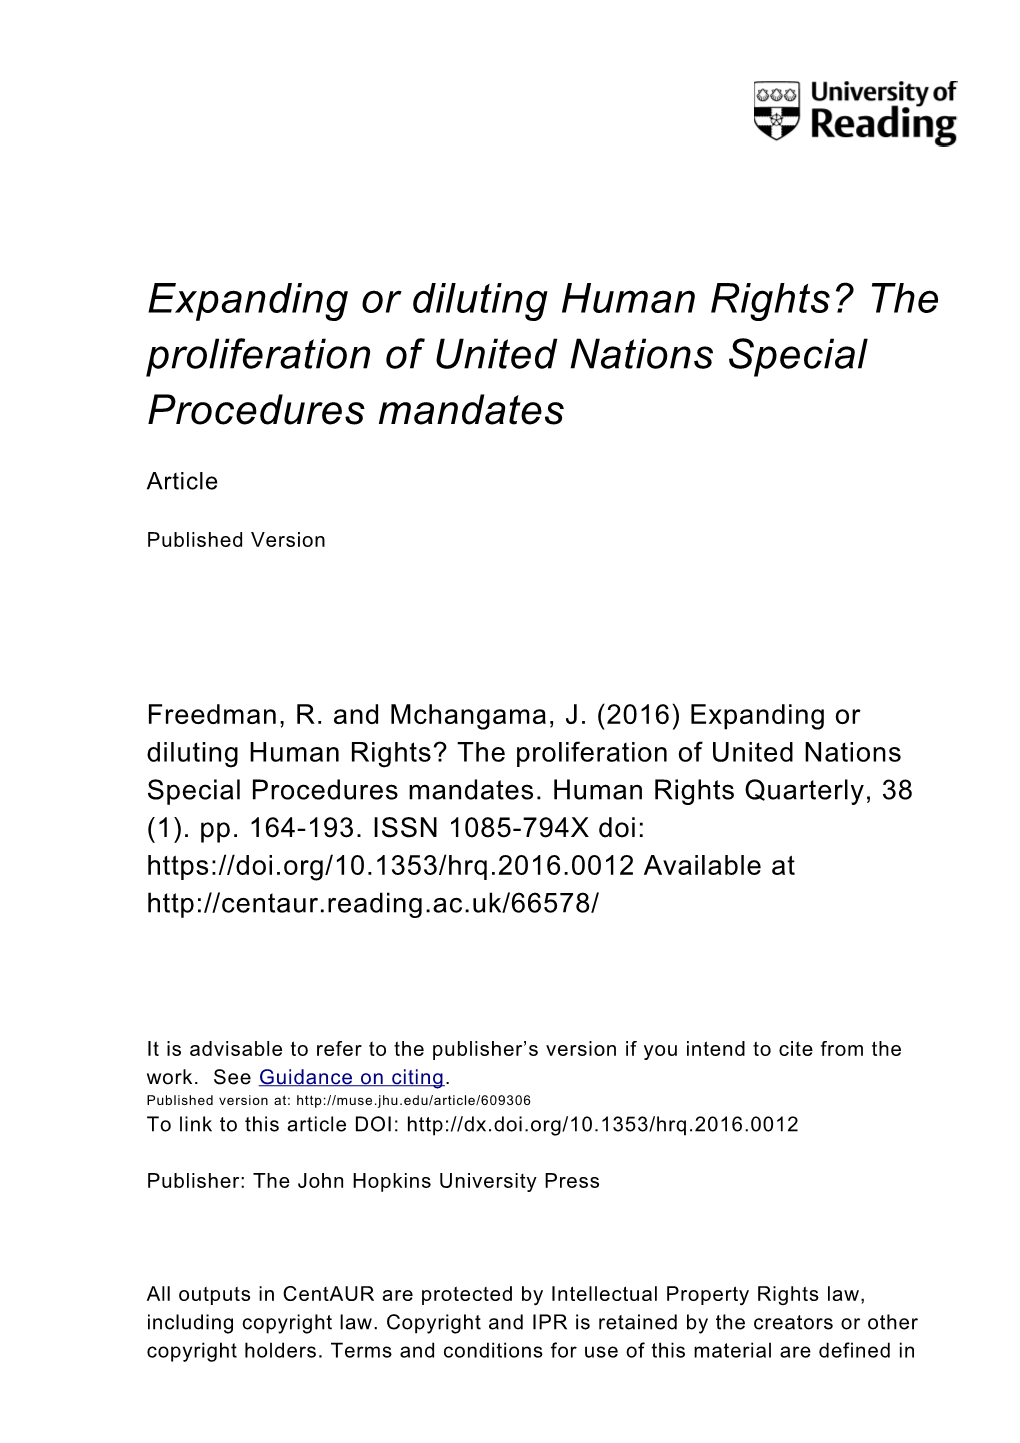 The Proliferation of United Nations Special Procedures Mandates